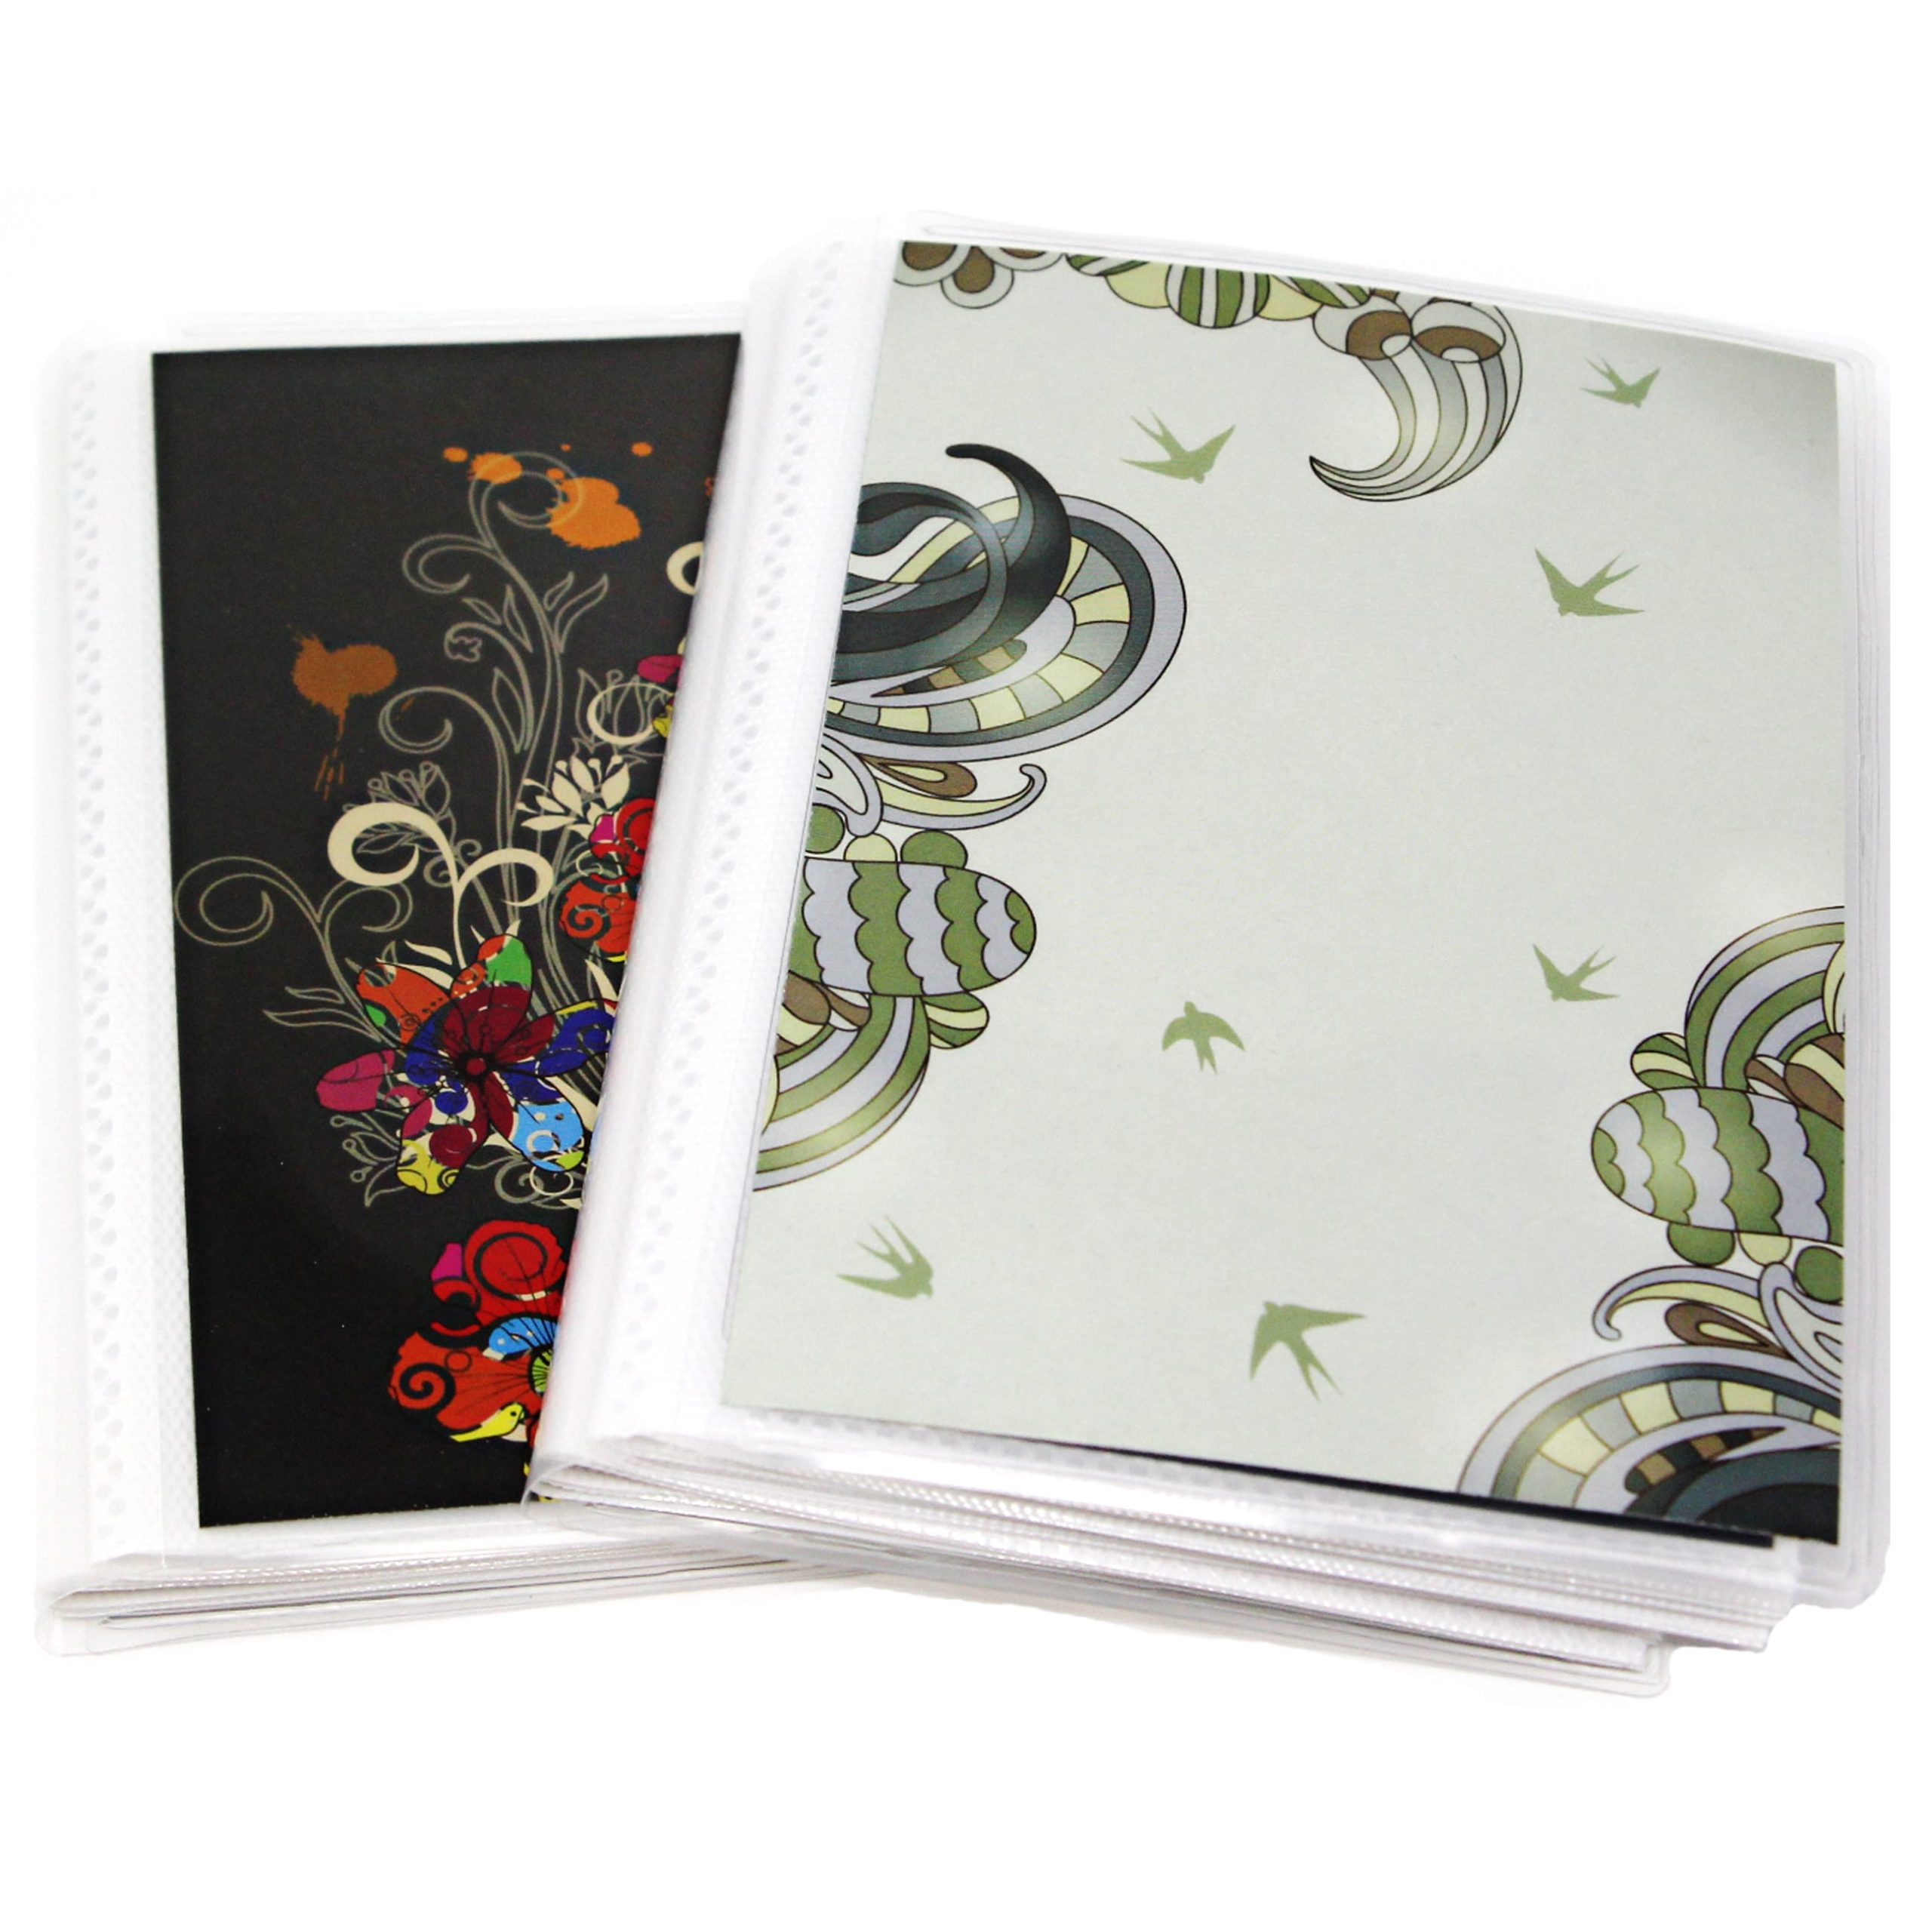 4 x 6 Photo Albums Pack of 2, Each Mini Photo Album Holds Up to 60 4x6  Photos - CocoPolka Company